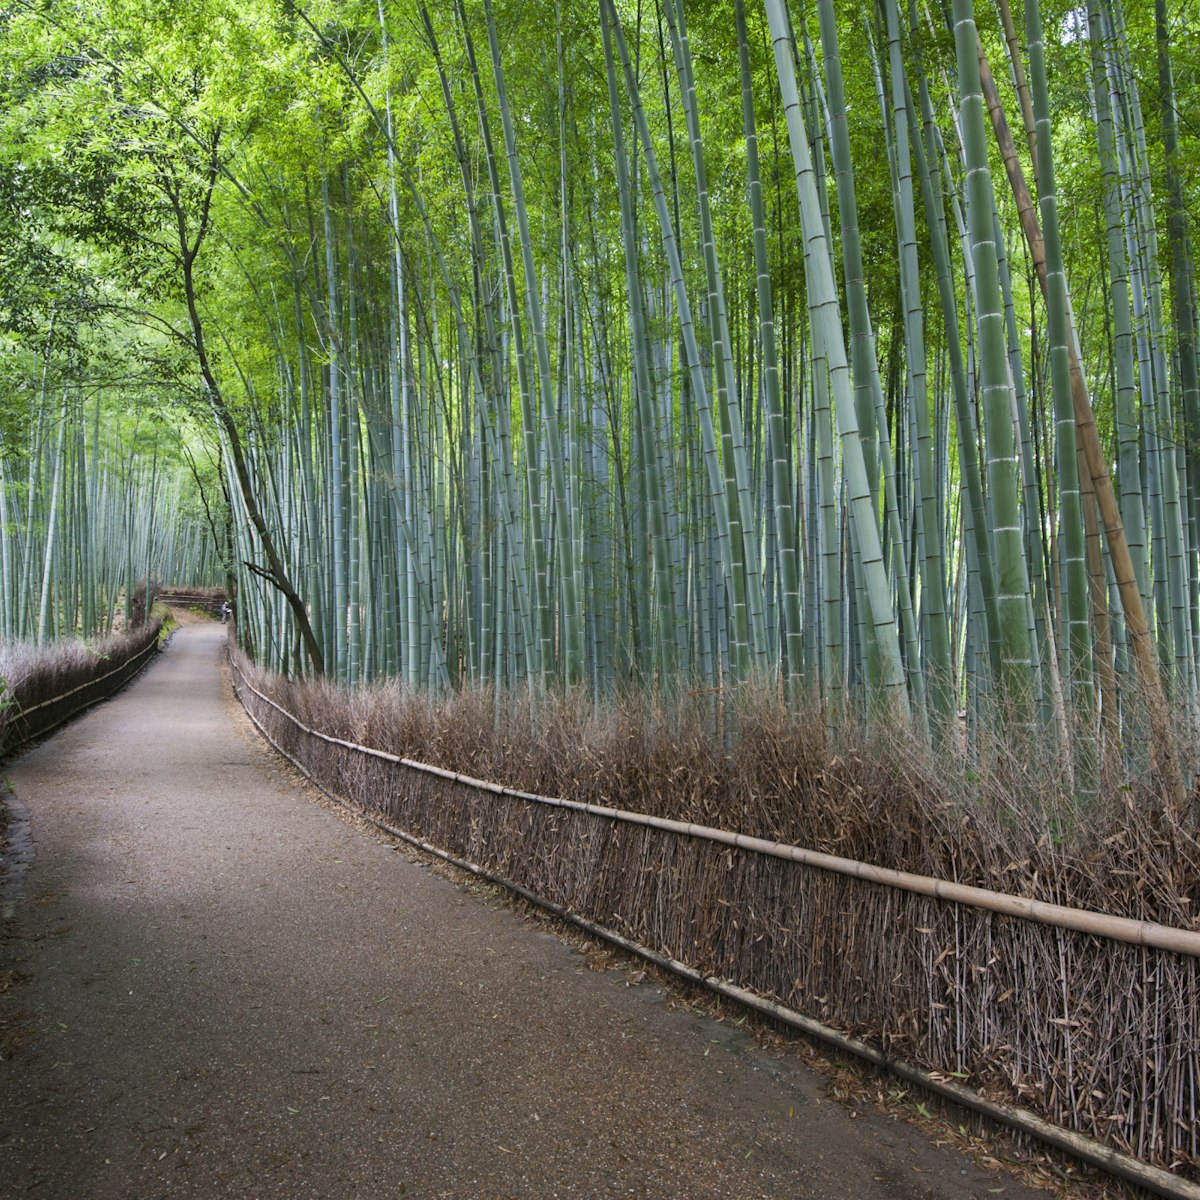 Path through bamboo forest